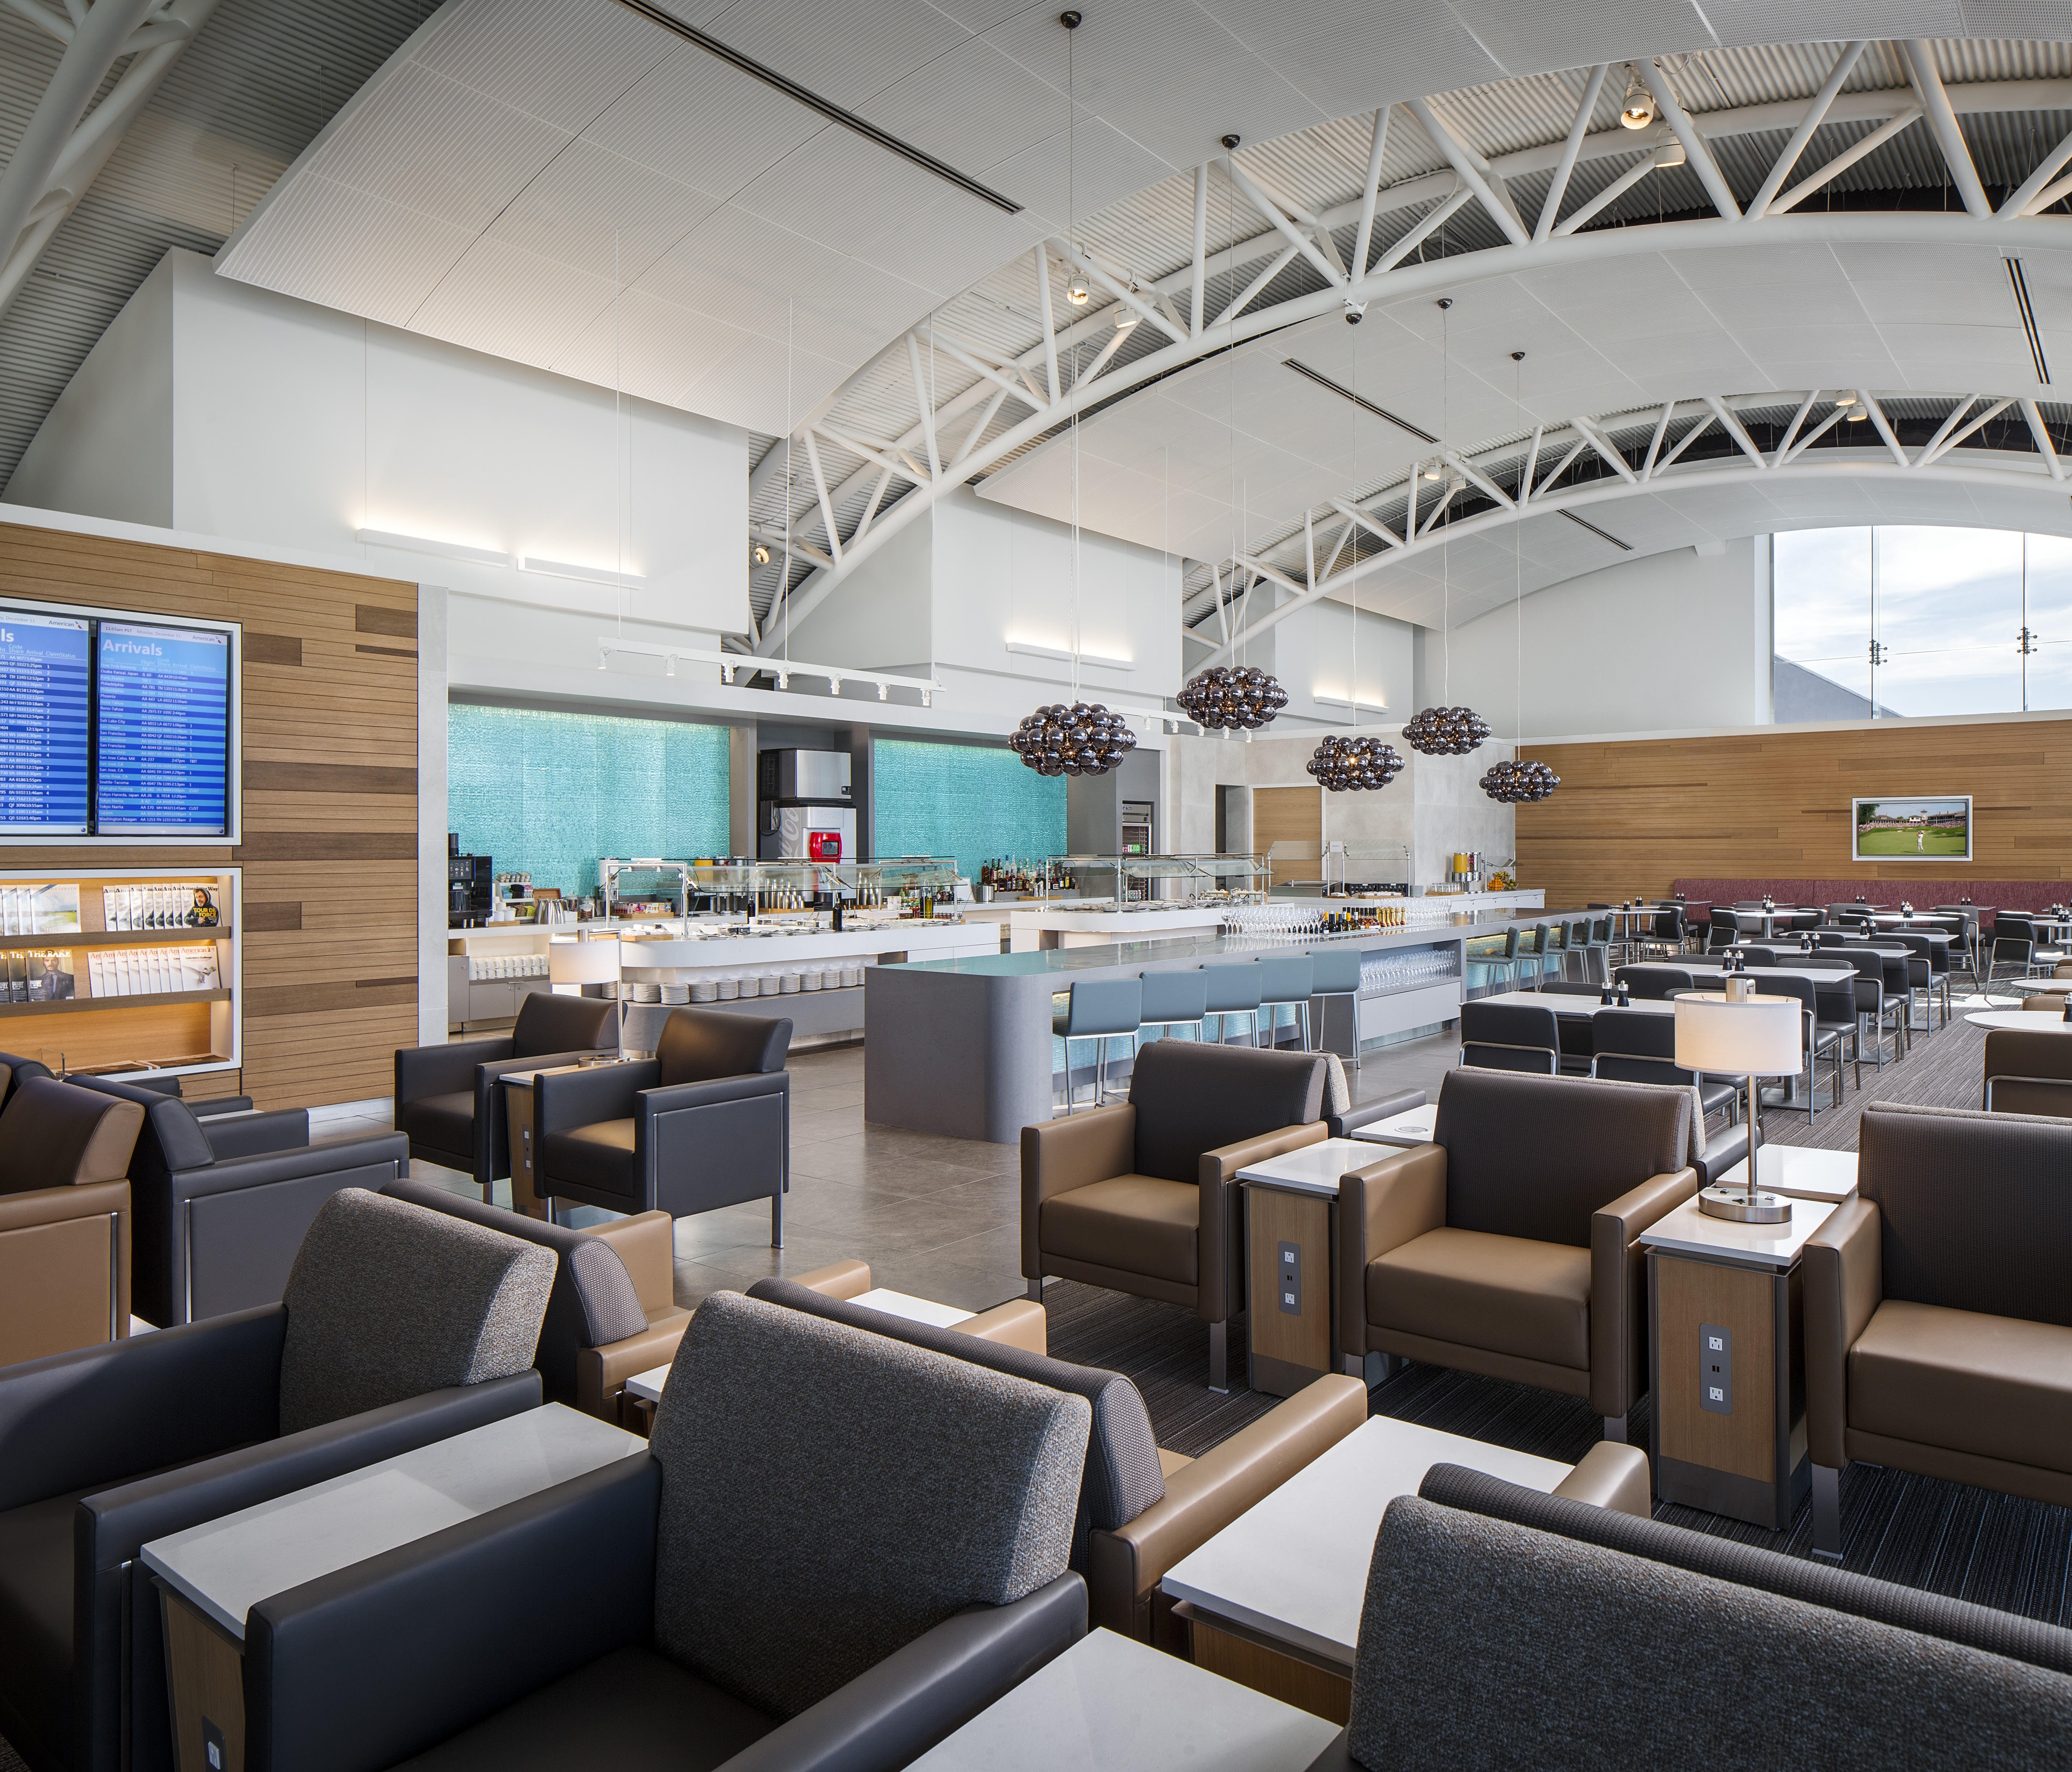 American Airlines Flagship Lounge LAX - Self Serve Food and Bar